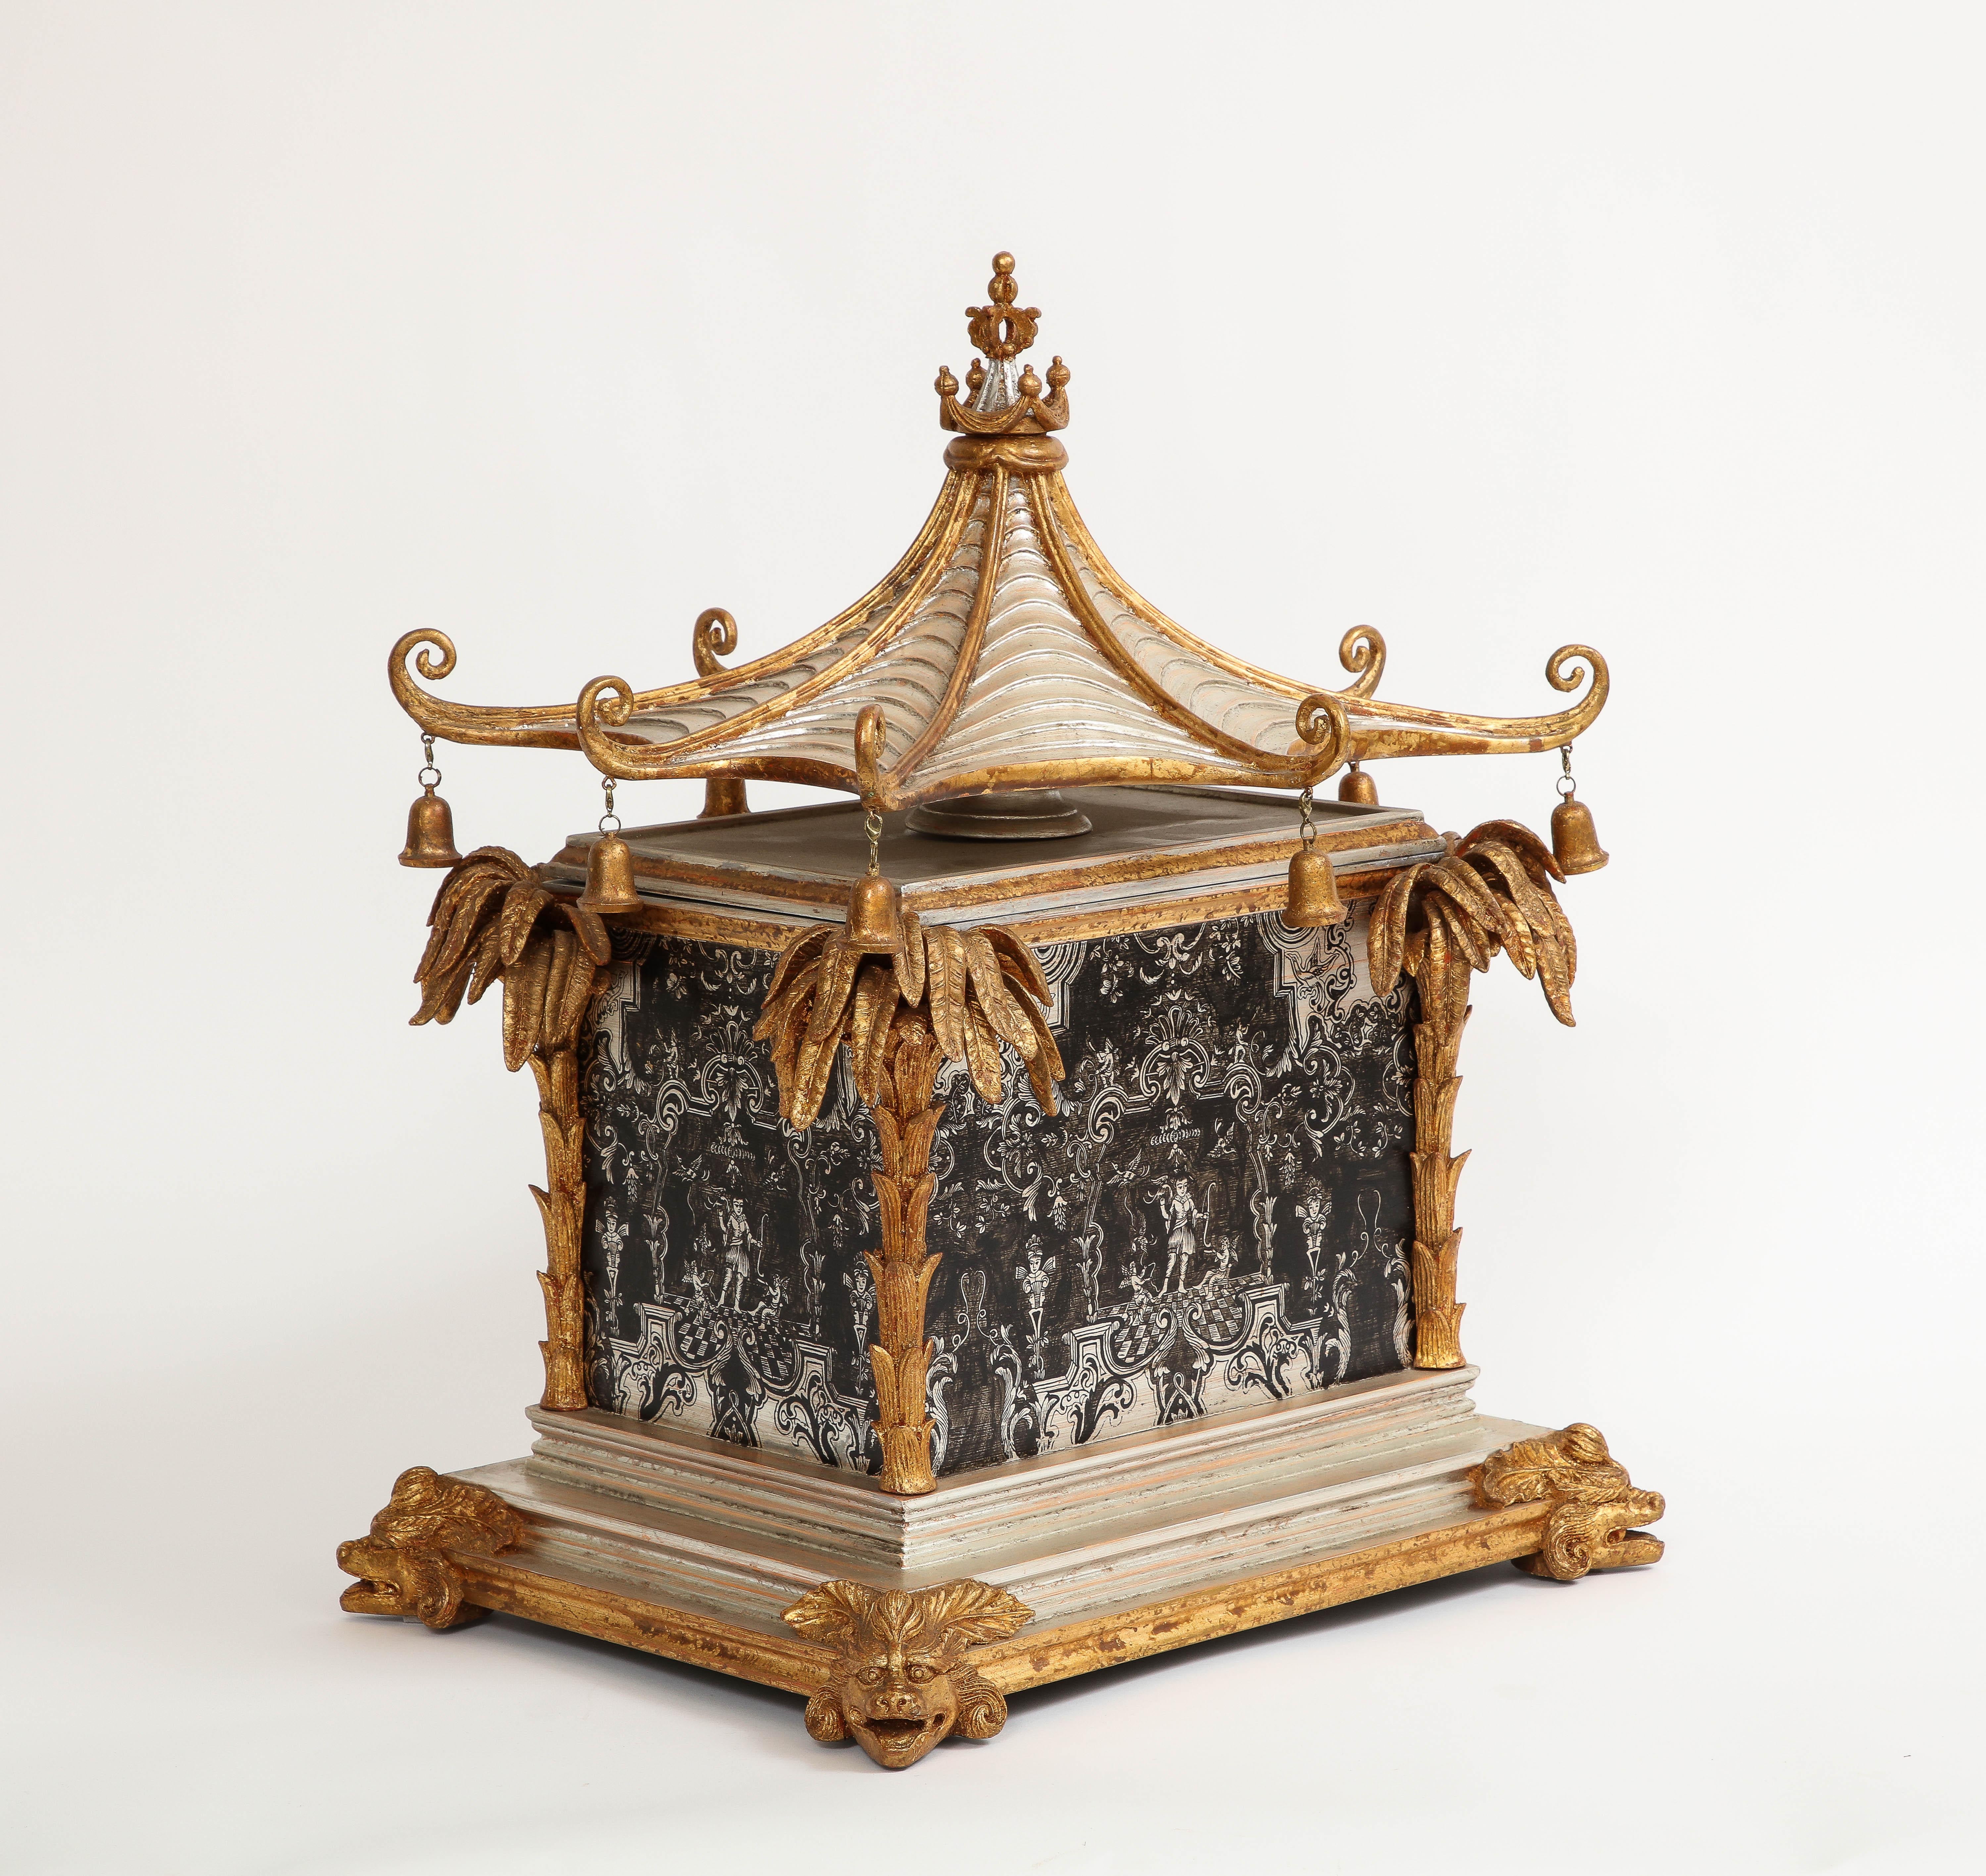 A 1930's French Gilt Lacquered Wood Pagoda Form Chinoiserie Platinum Painted Box, Attributed to Jansen. At first glance, the box's visual allure is simply breathtaking. Adorned with meticulous hand-carved and hand-painted details, this remarkable